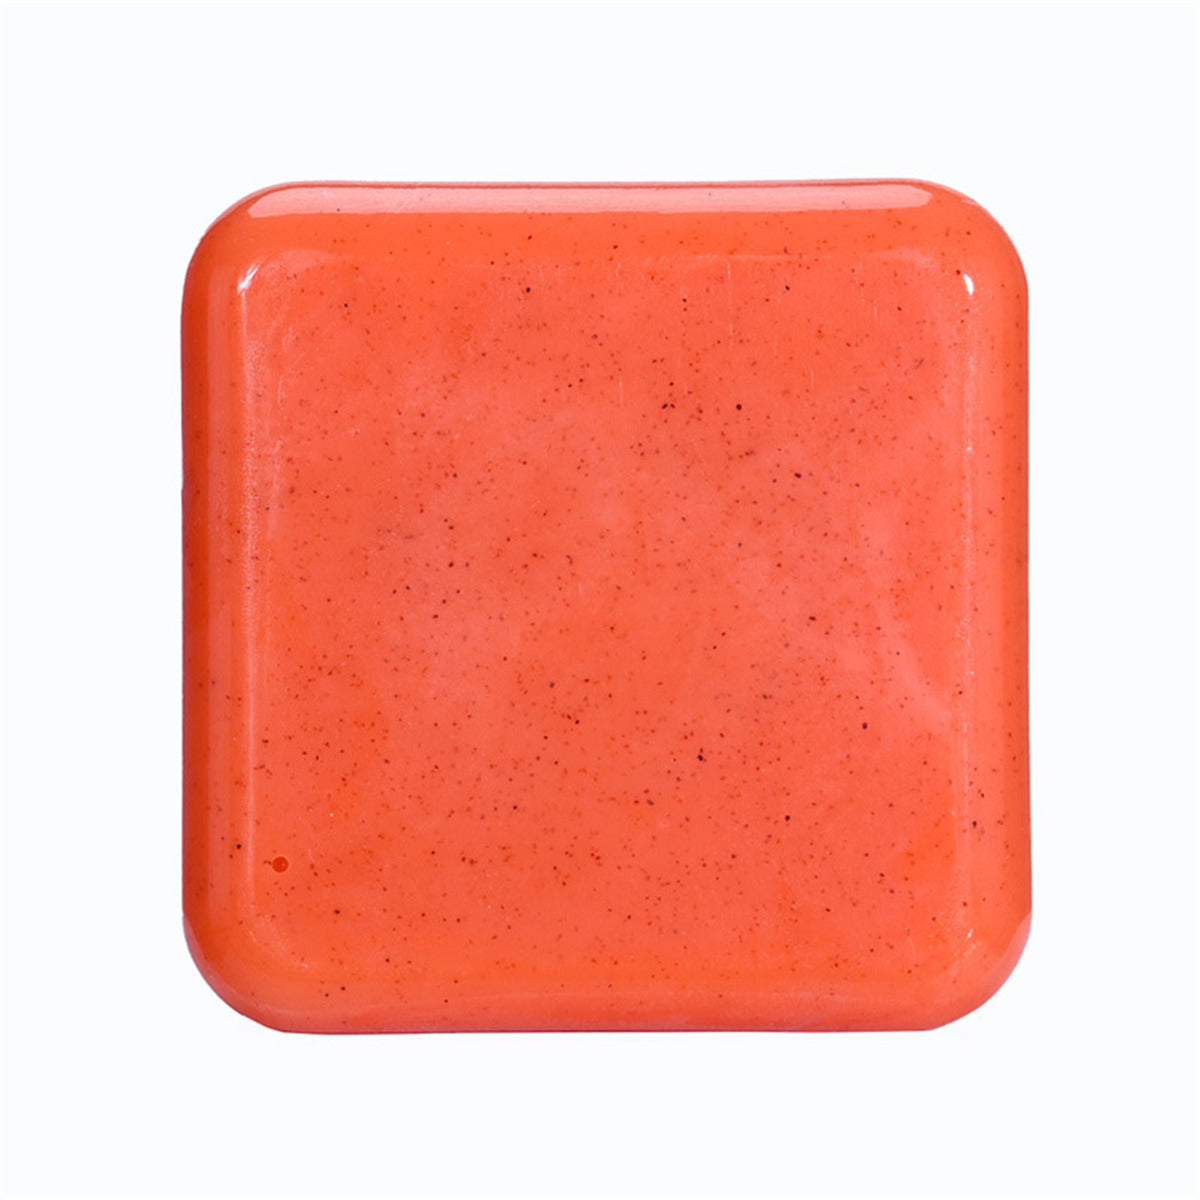 Radiant Skin Duo: Handcrafted Turmeric Soap Bars - Target Dark Spots, Exfoliate, and Nourish Face and Body - Suitable for All Skin Types - Pack of 2